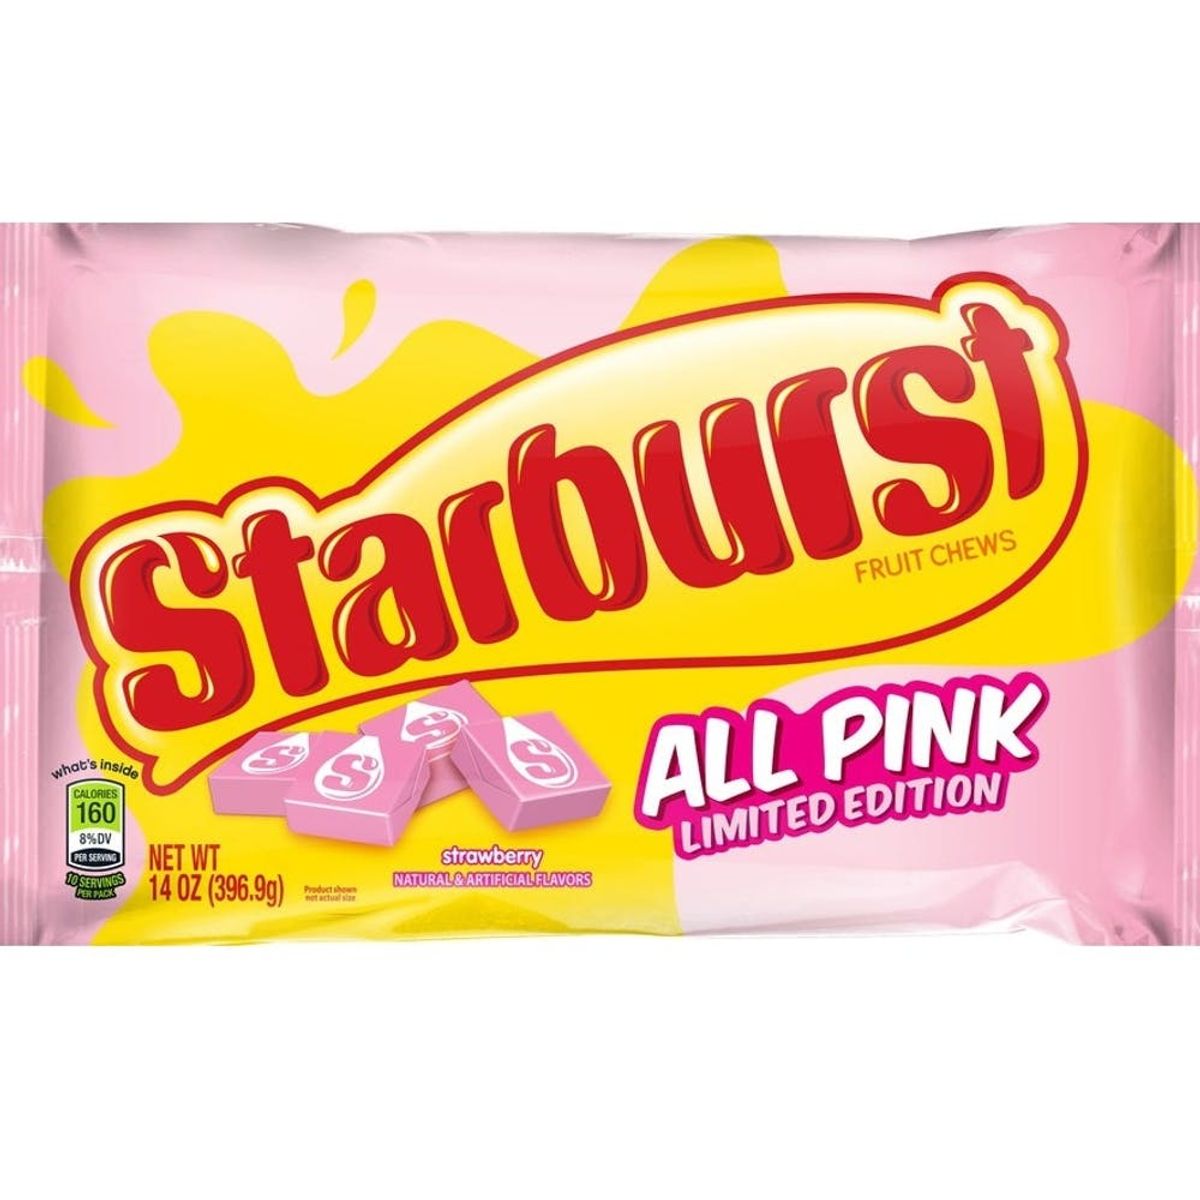 ALL Pink Starburst Bags Are Coming Because No One Really Needs Those Other Icky Colors